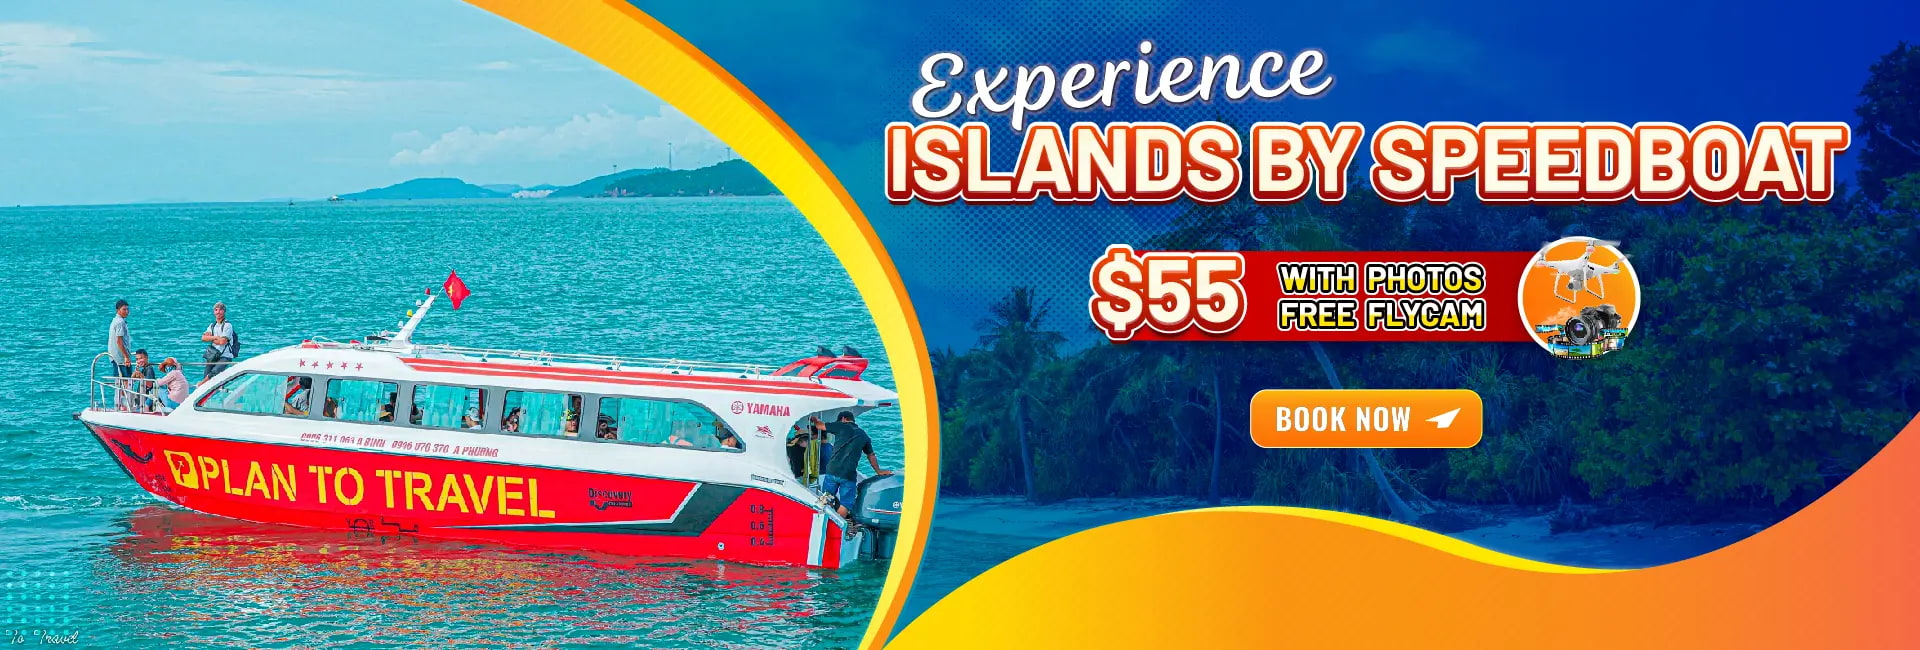 Experience Phu Quoc islands by speedboat